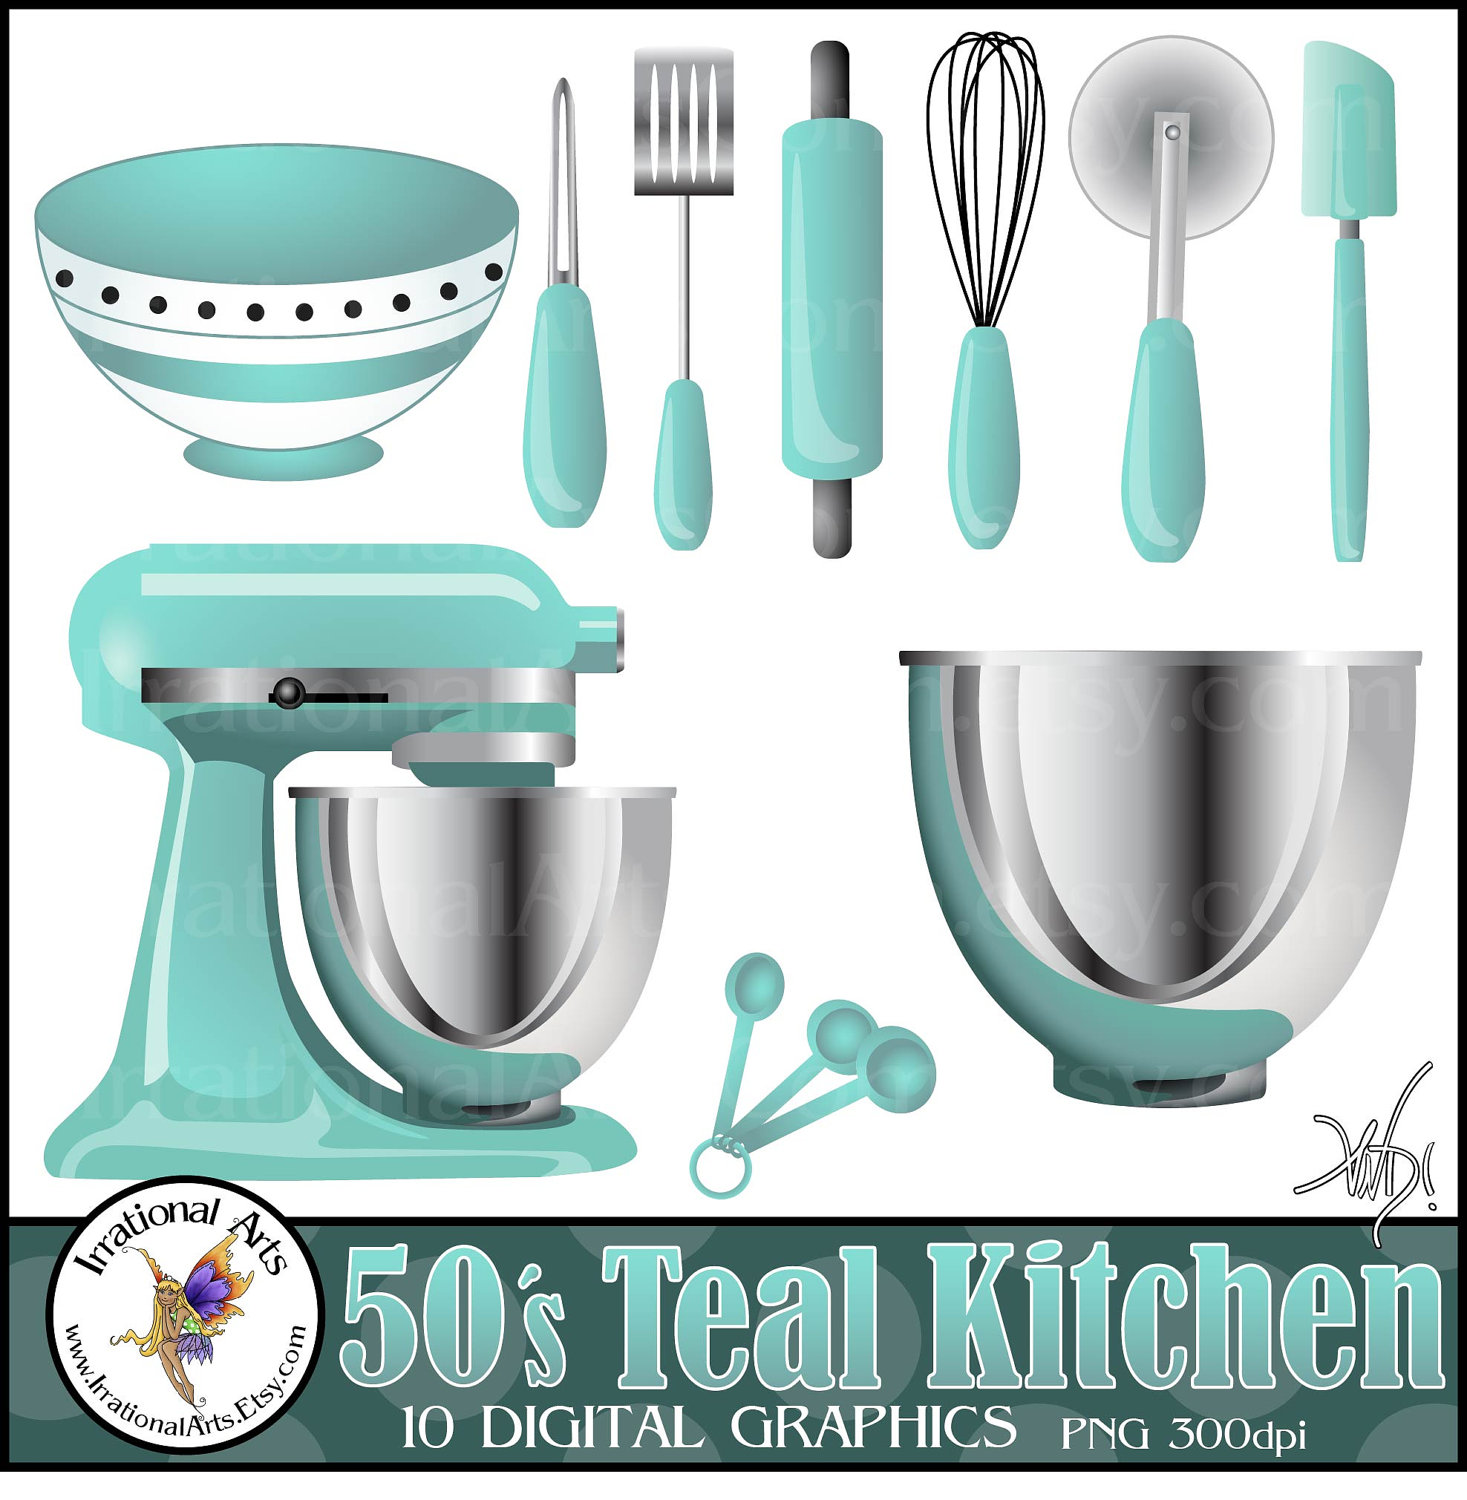 50's Teal Kitchen Kitsch With 10 PNG Kitchen Digital Clipart Graphics  Baking Supplies: Bowl, Whisk, Rolling Pin instant Download 